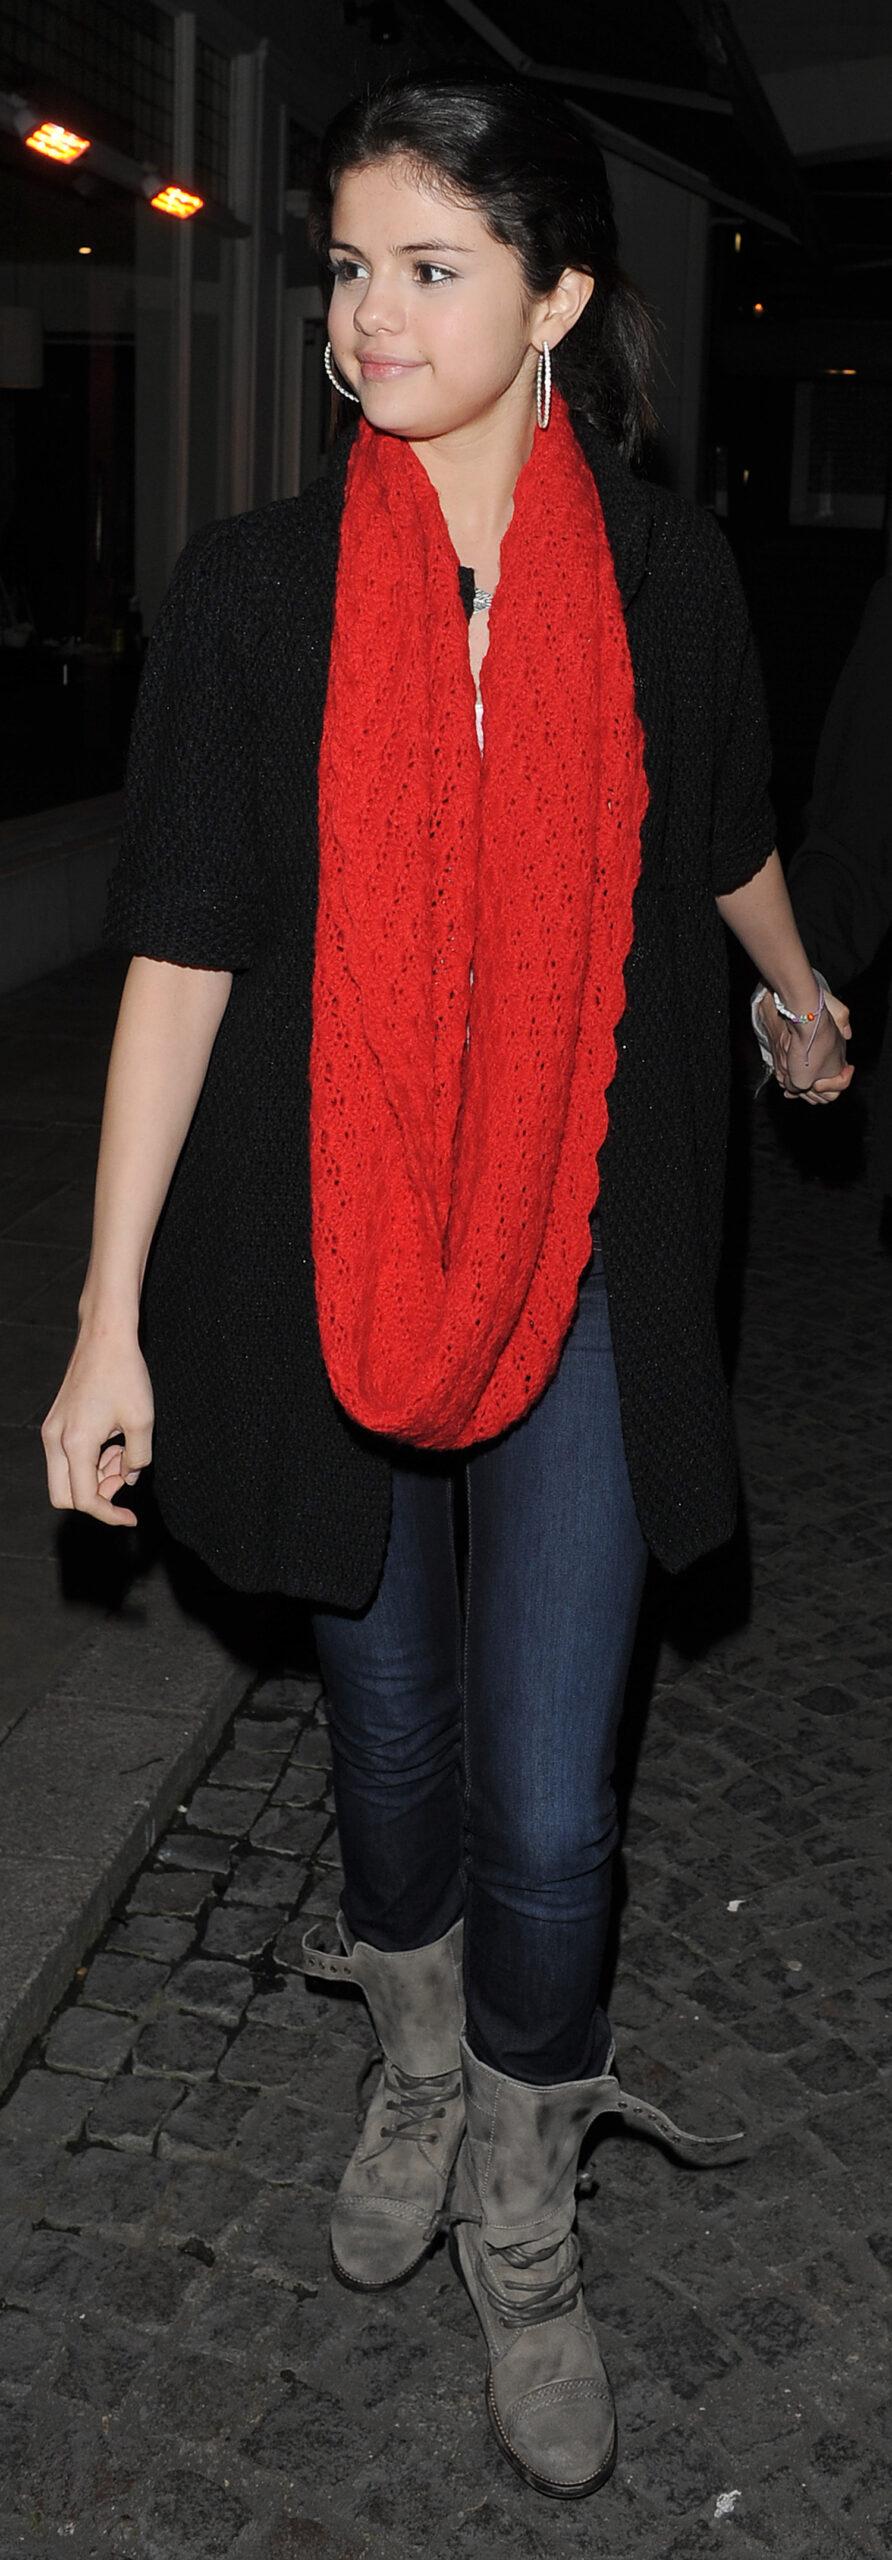 American actress and singer Selena Gomez leaving the Bluebird Cafe in Chelsea having had dinner there with her mother Mandy Gomez and friends Selena wore a white t-shirt black cardigan grey boots and a huge red scarf